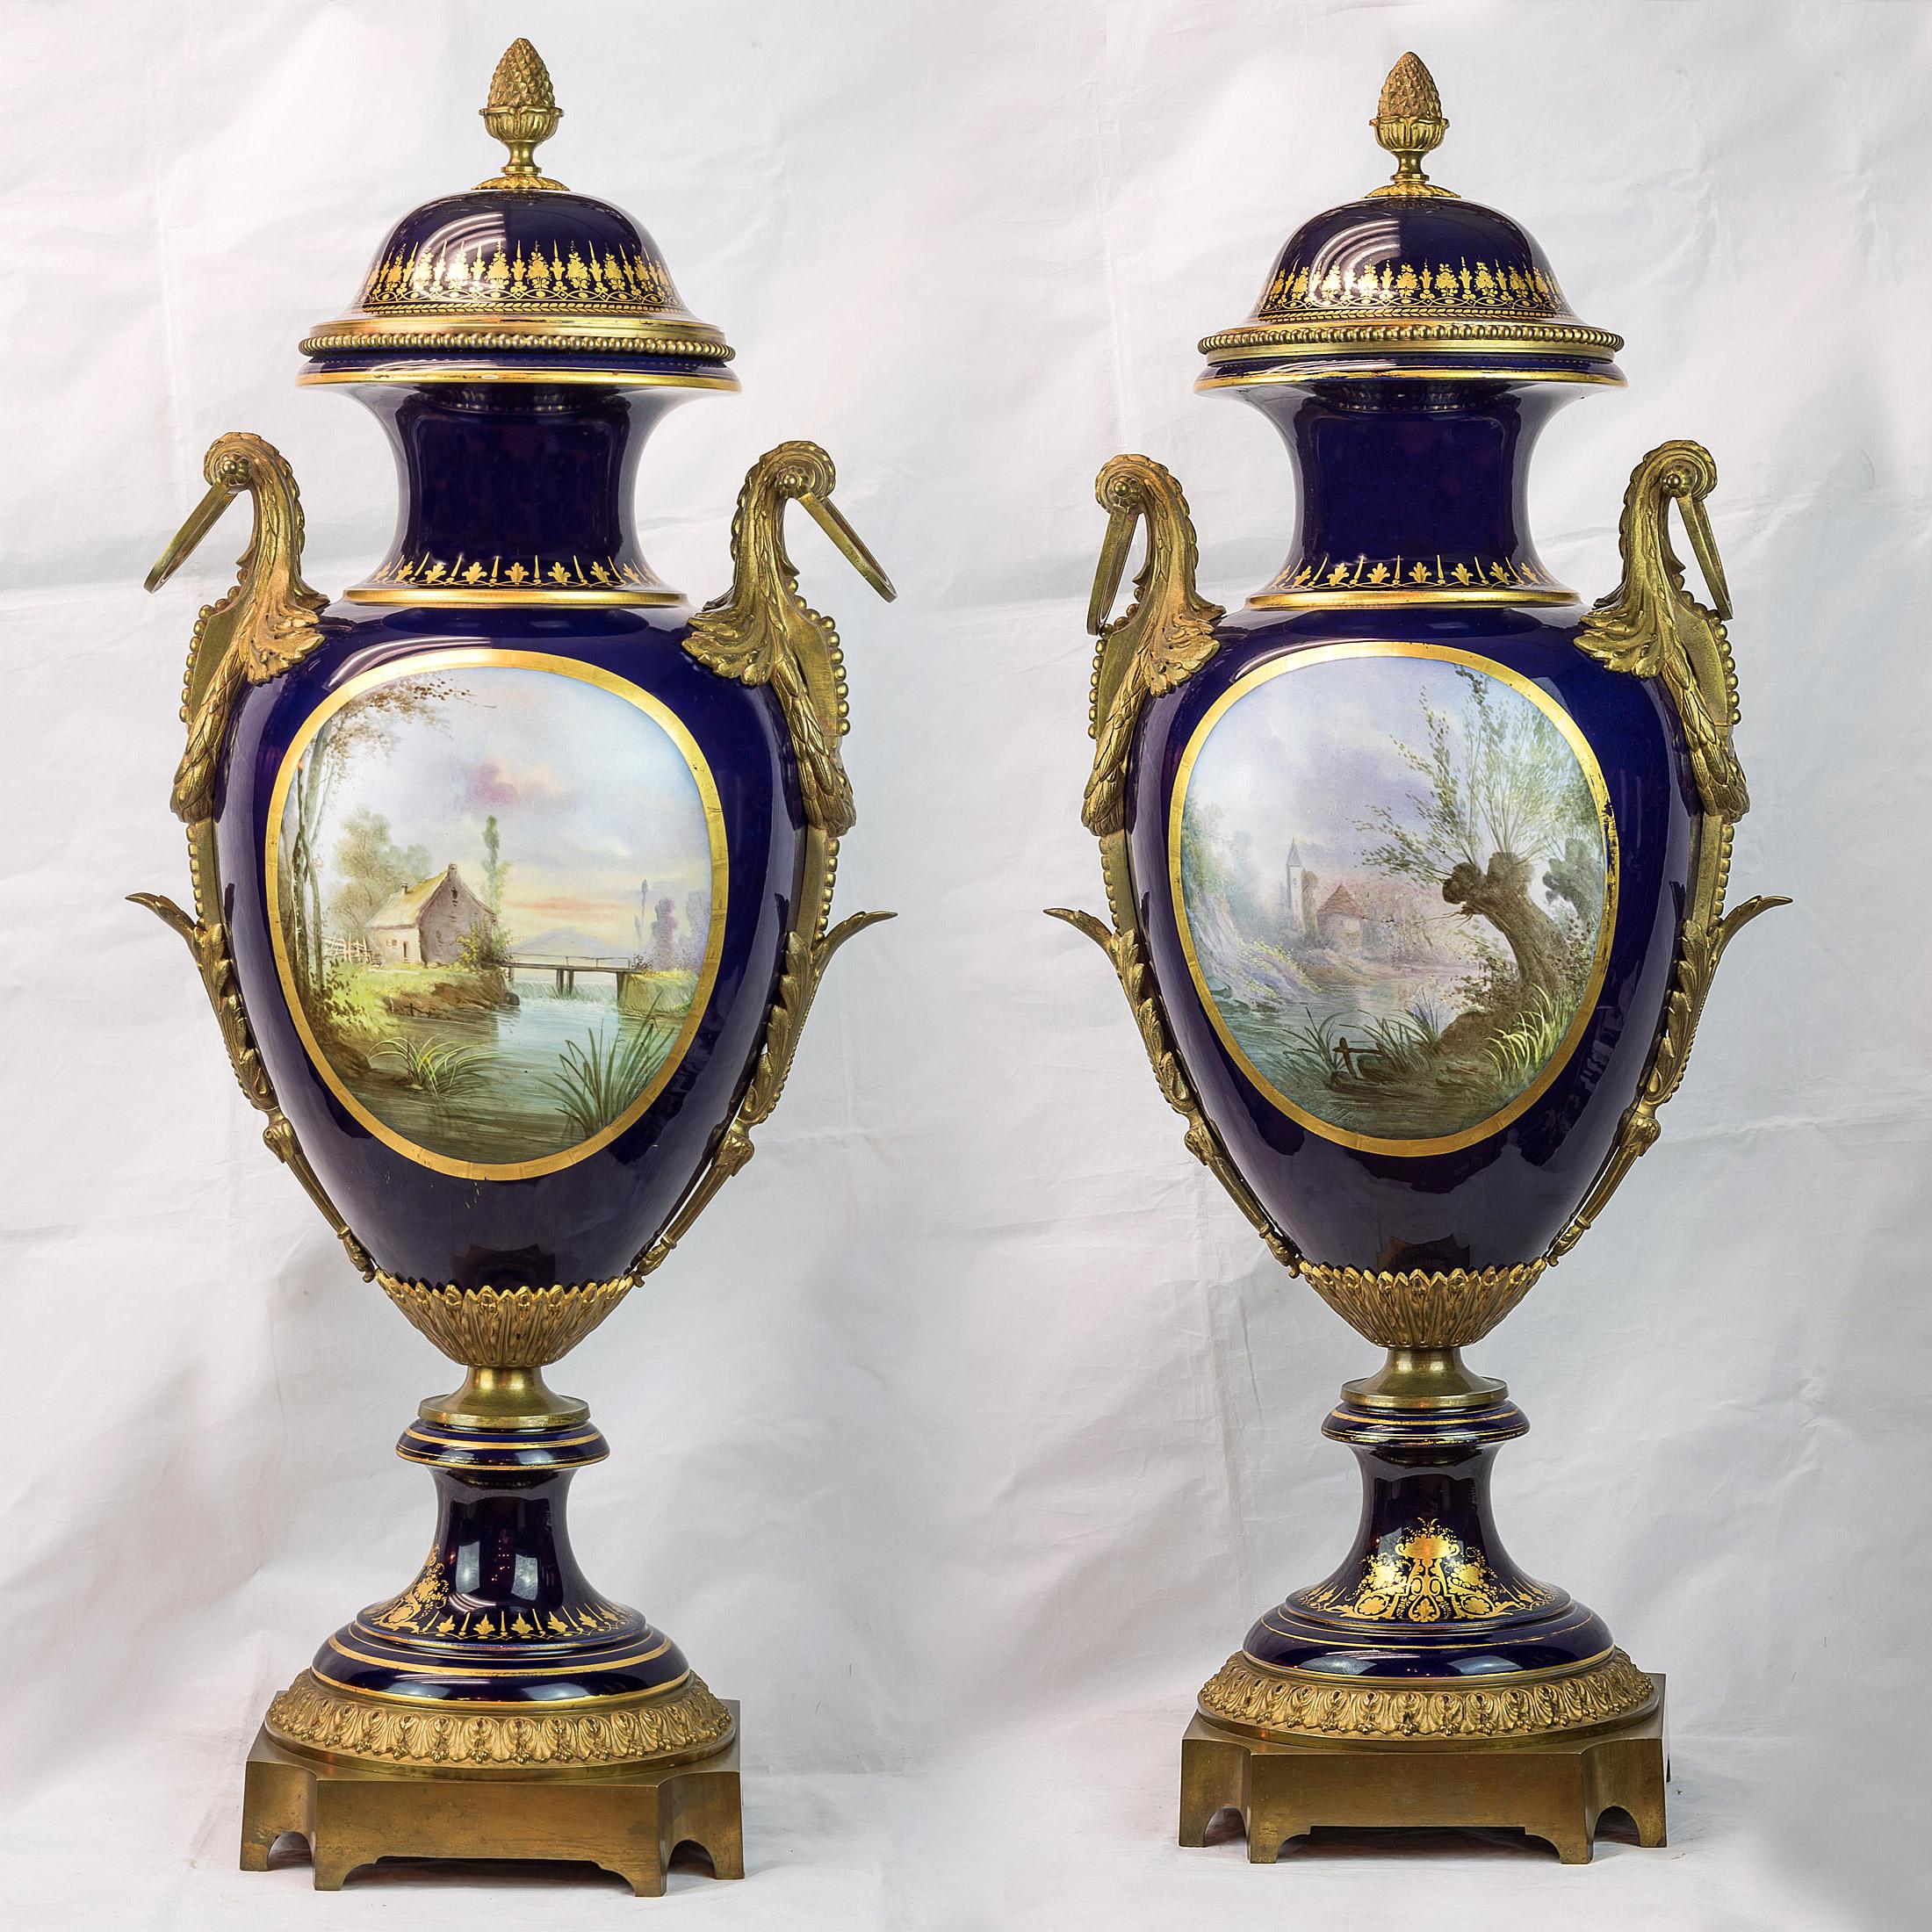 An important pair of ormolu-mounted cobalt blue Sèvres Porcelain vases with hand painted portrait and scenes to the front and back.

Date: circa 1880
Origin: French
Dimension: 38 in. x 16 1/2 in.
 